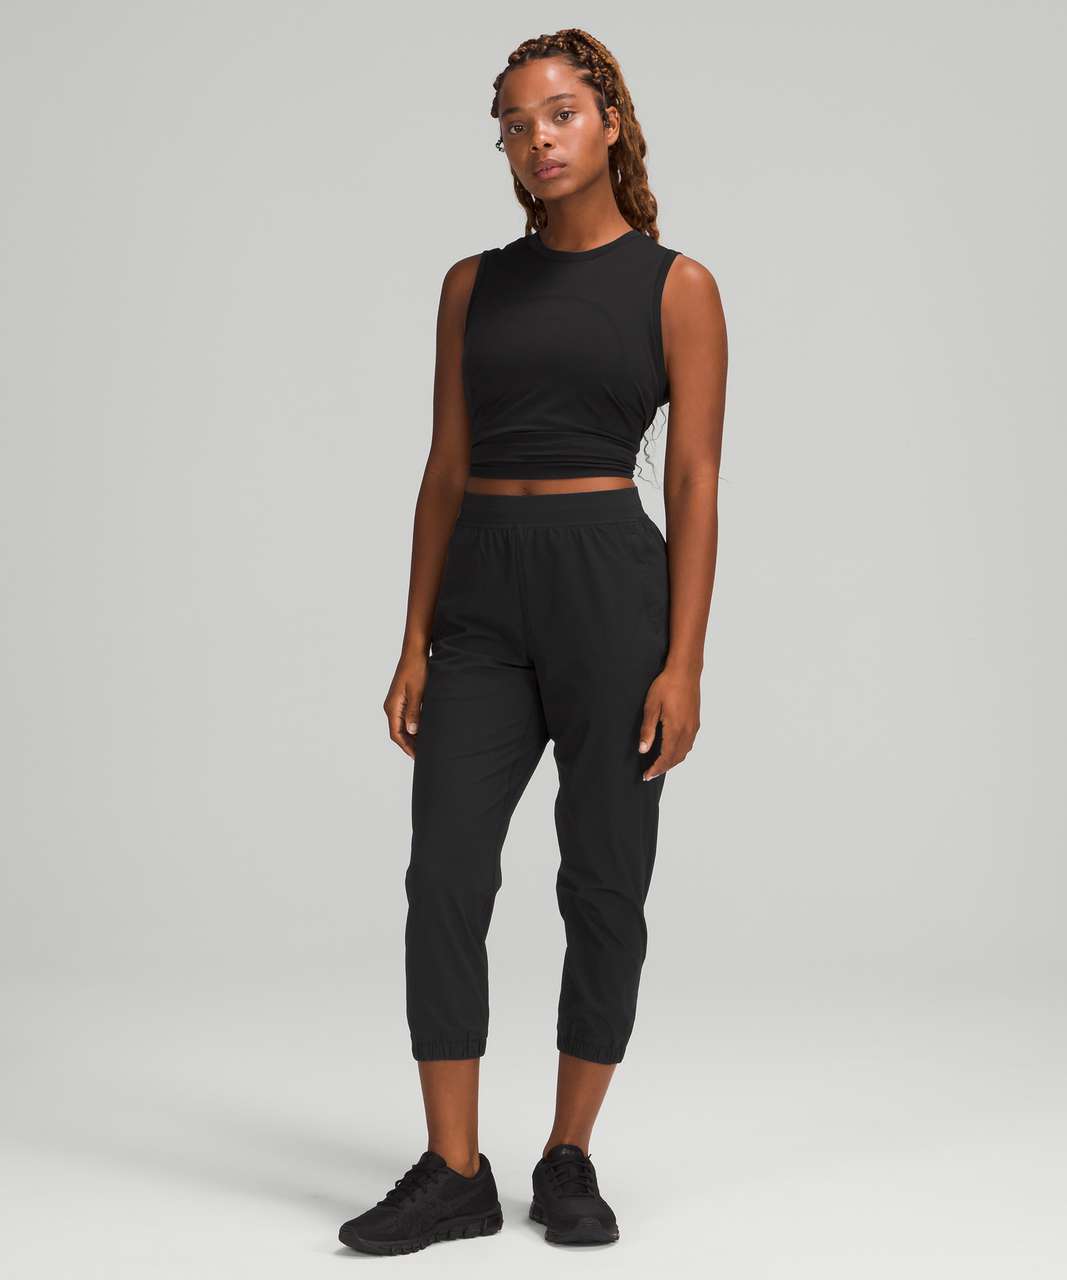 Lululemon Athletic Dress Pants Black Size 8 - $50 (41% Off Retail) - From  Henley